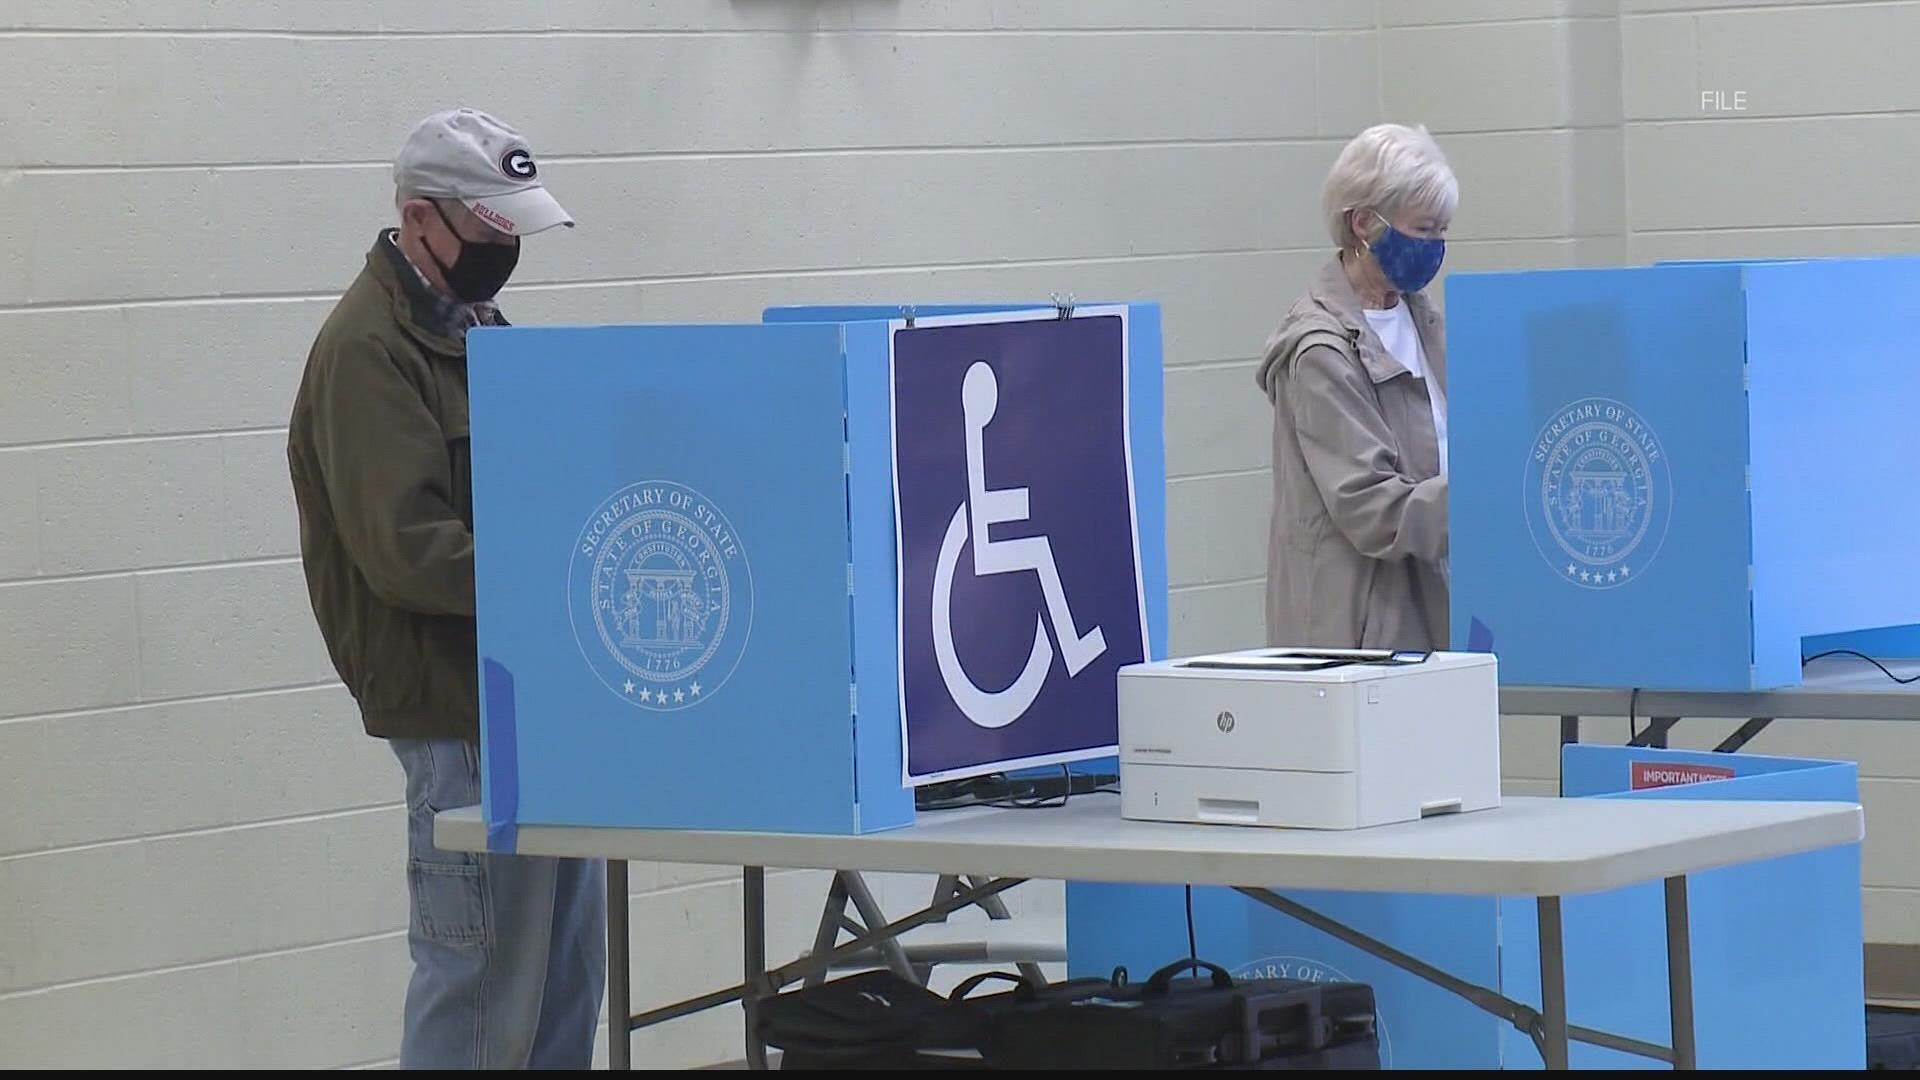 Polling machines will head to their locations ahead of the November election if proven that they work.